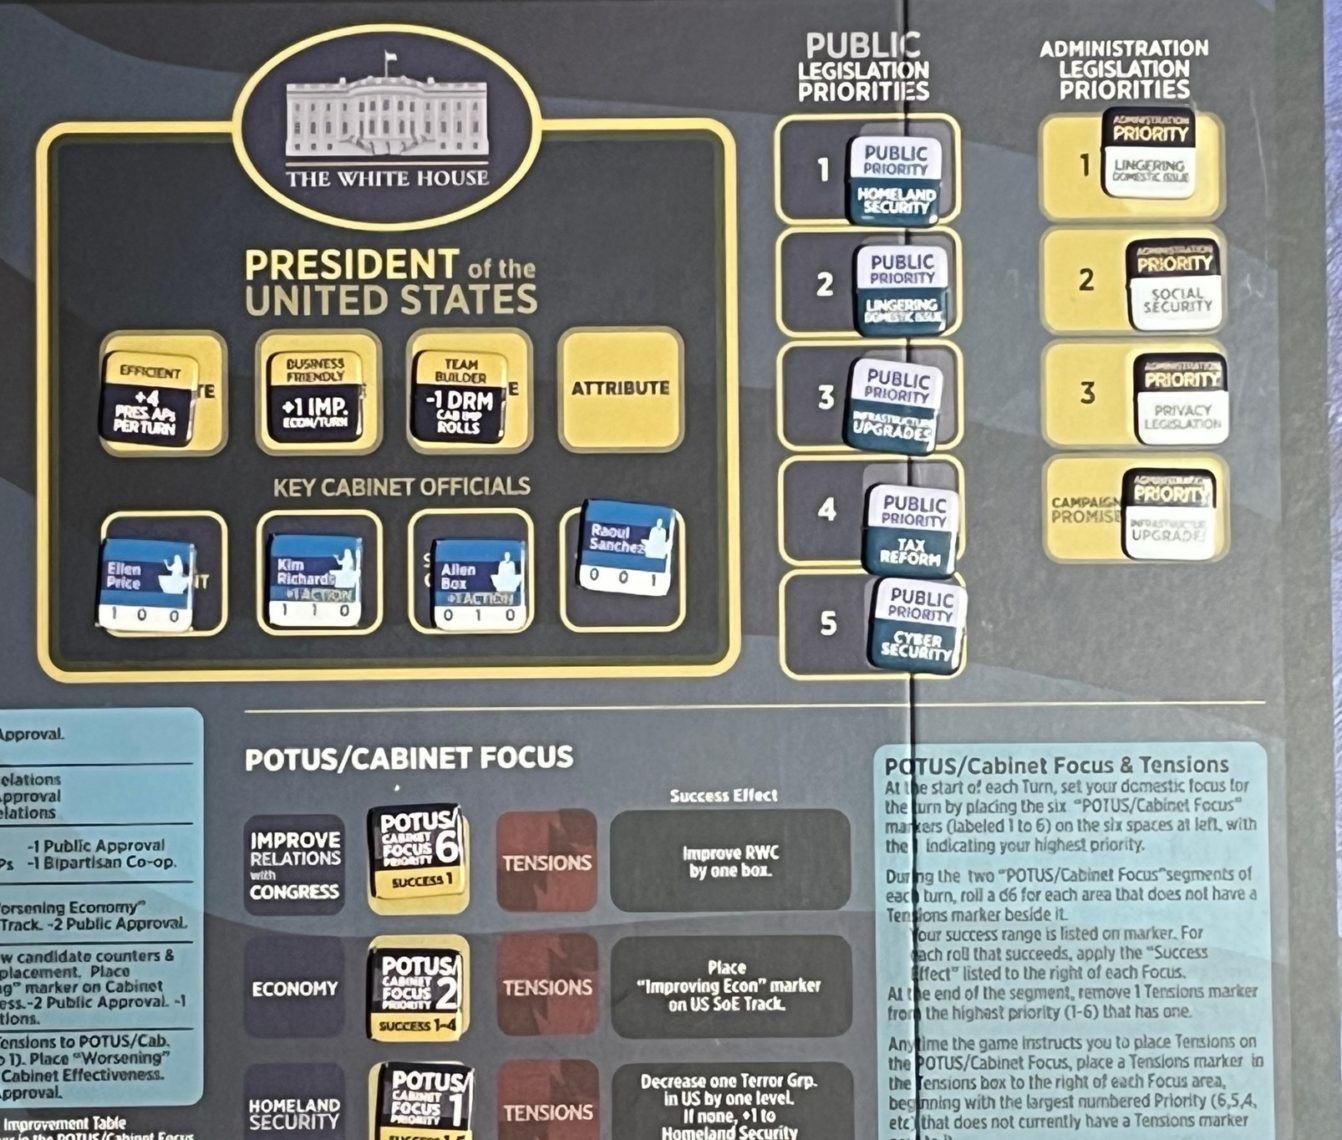 Closeup of Cabinet and Legislative priorities section of gameboard of GMT's Mr President